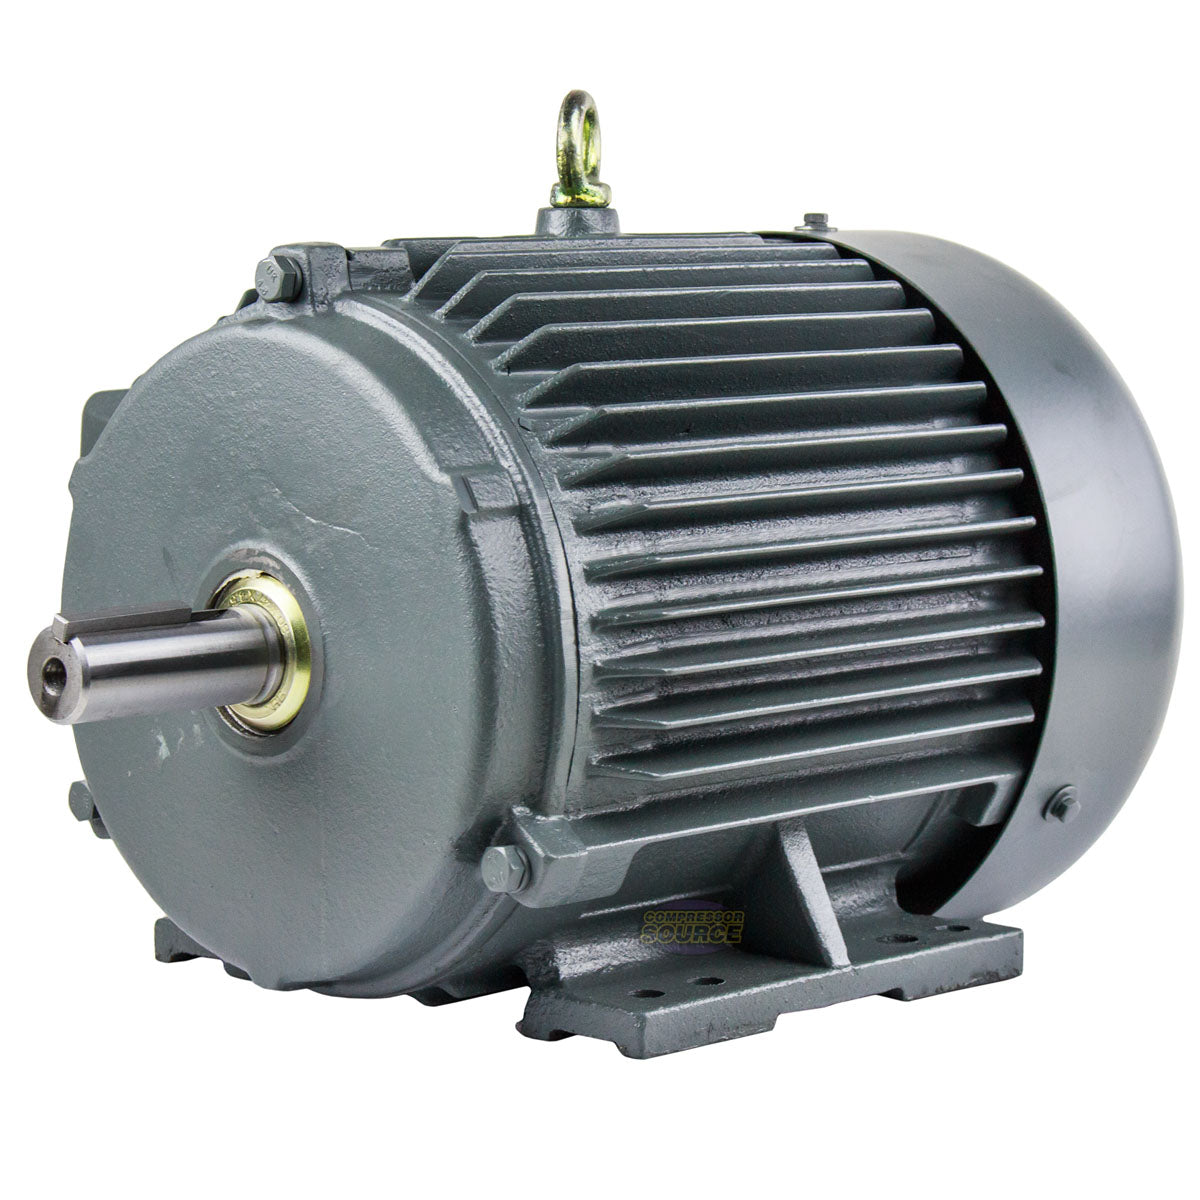 5 HP 3 Phase Electric Motor 1800 RPM 184T Frame TEFC 230/460 Volt Severe  Duty